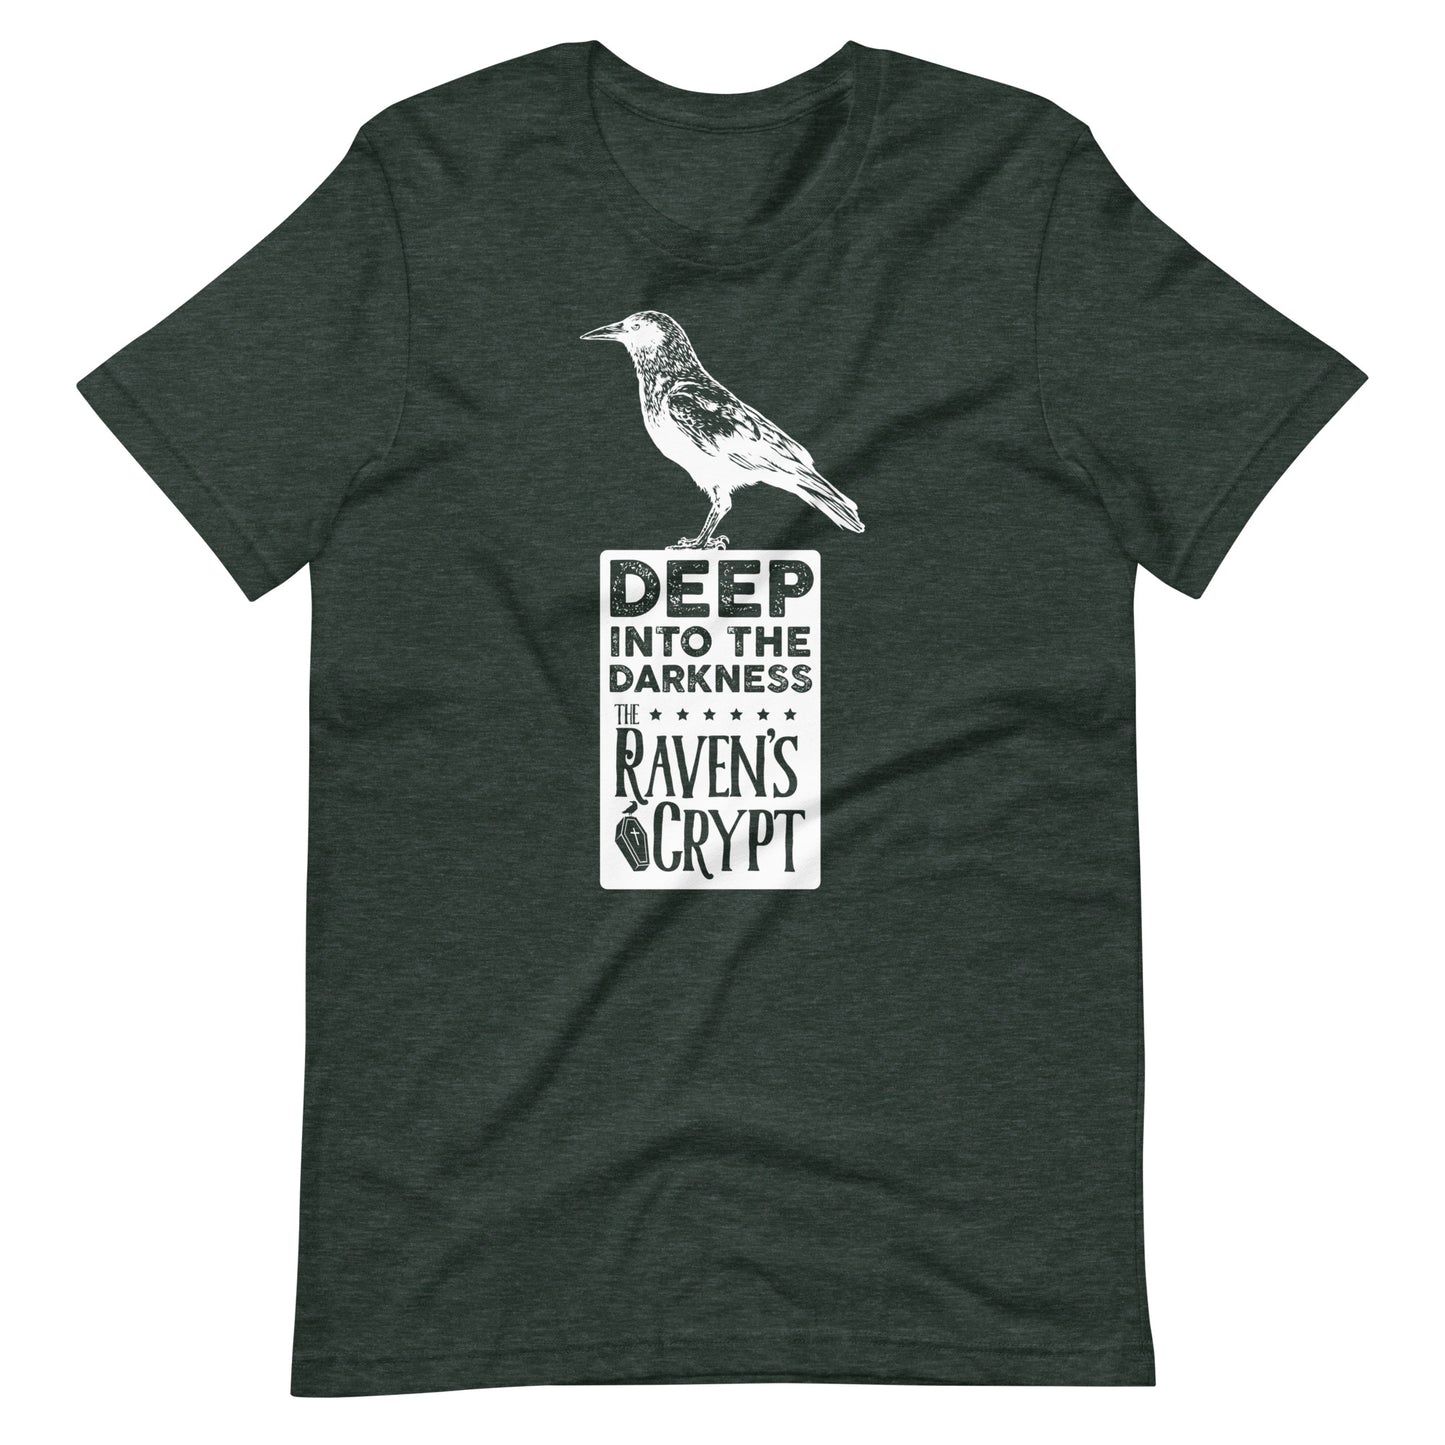 Deep Into the Darkness Crypt 2 - Men's t-shirt - Heather Forest Front